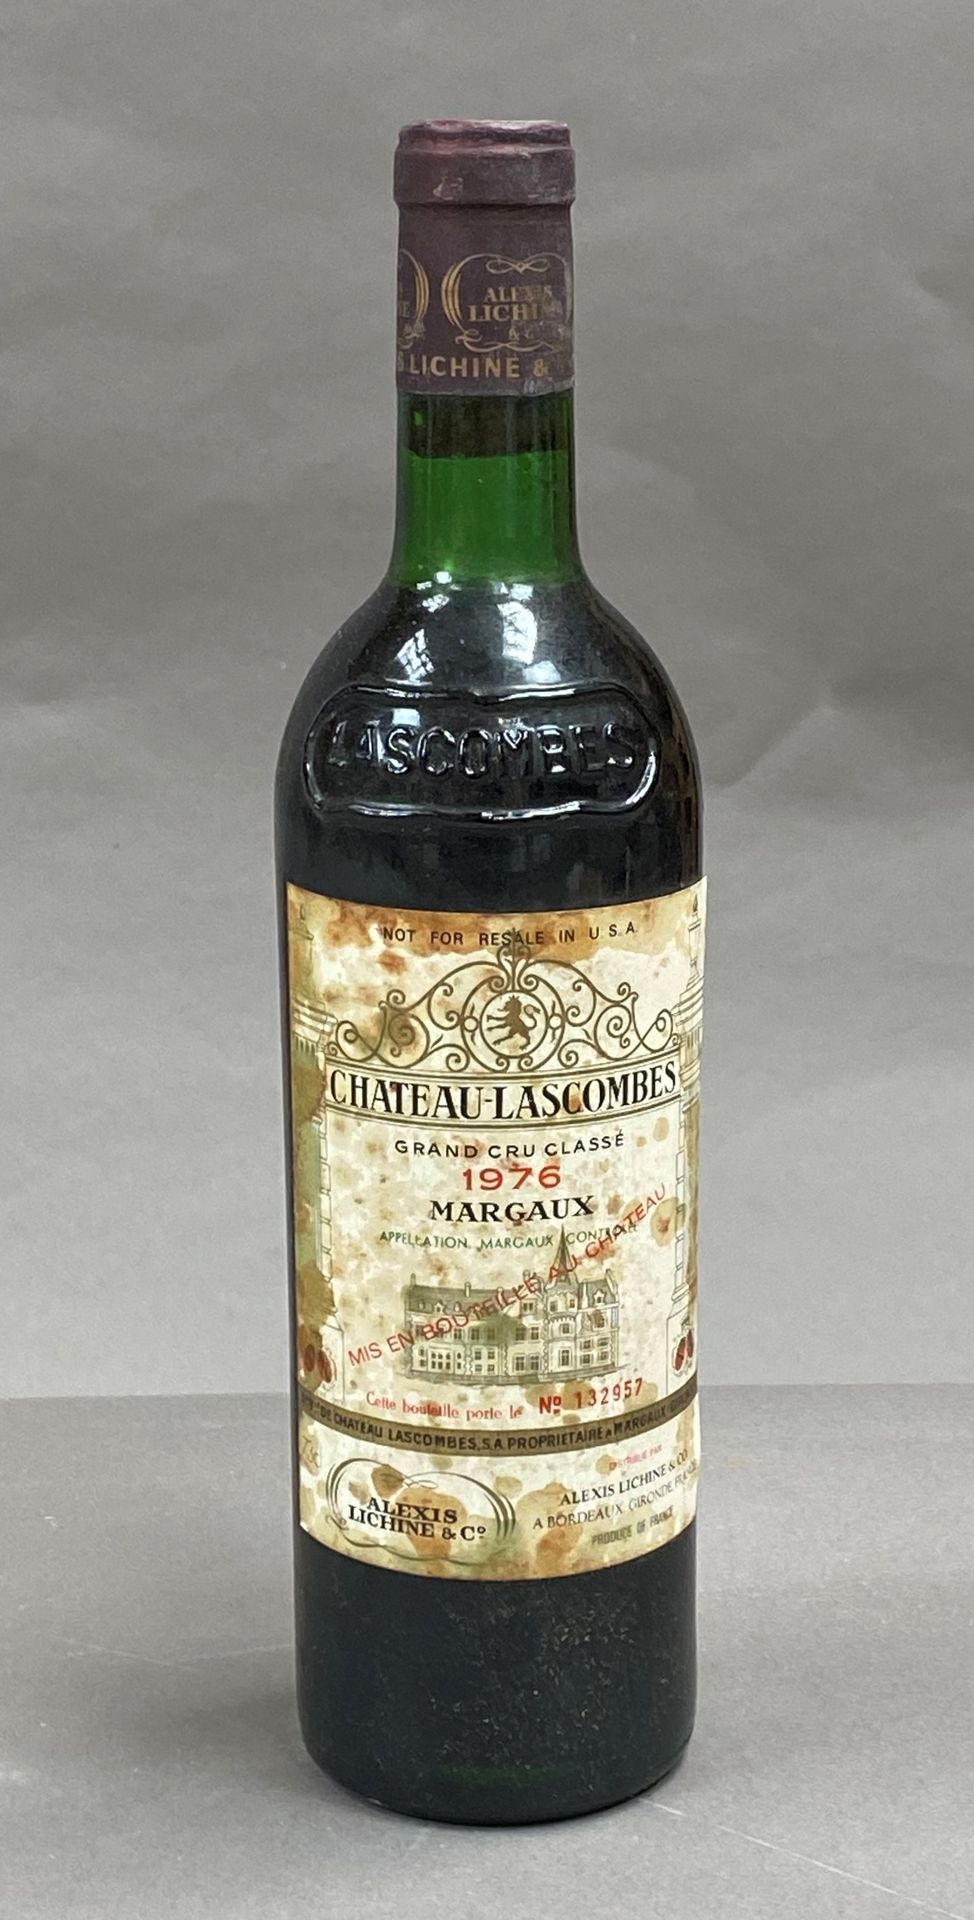 Null 1 bottle Château Lascombes 1976 2nd GCC Margaux (NTLB stained)